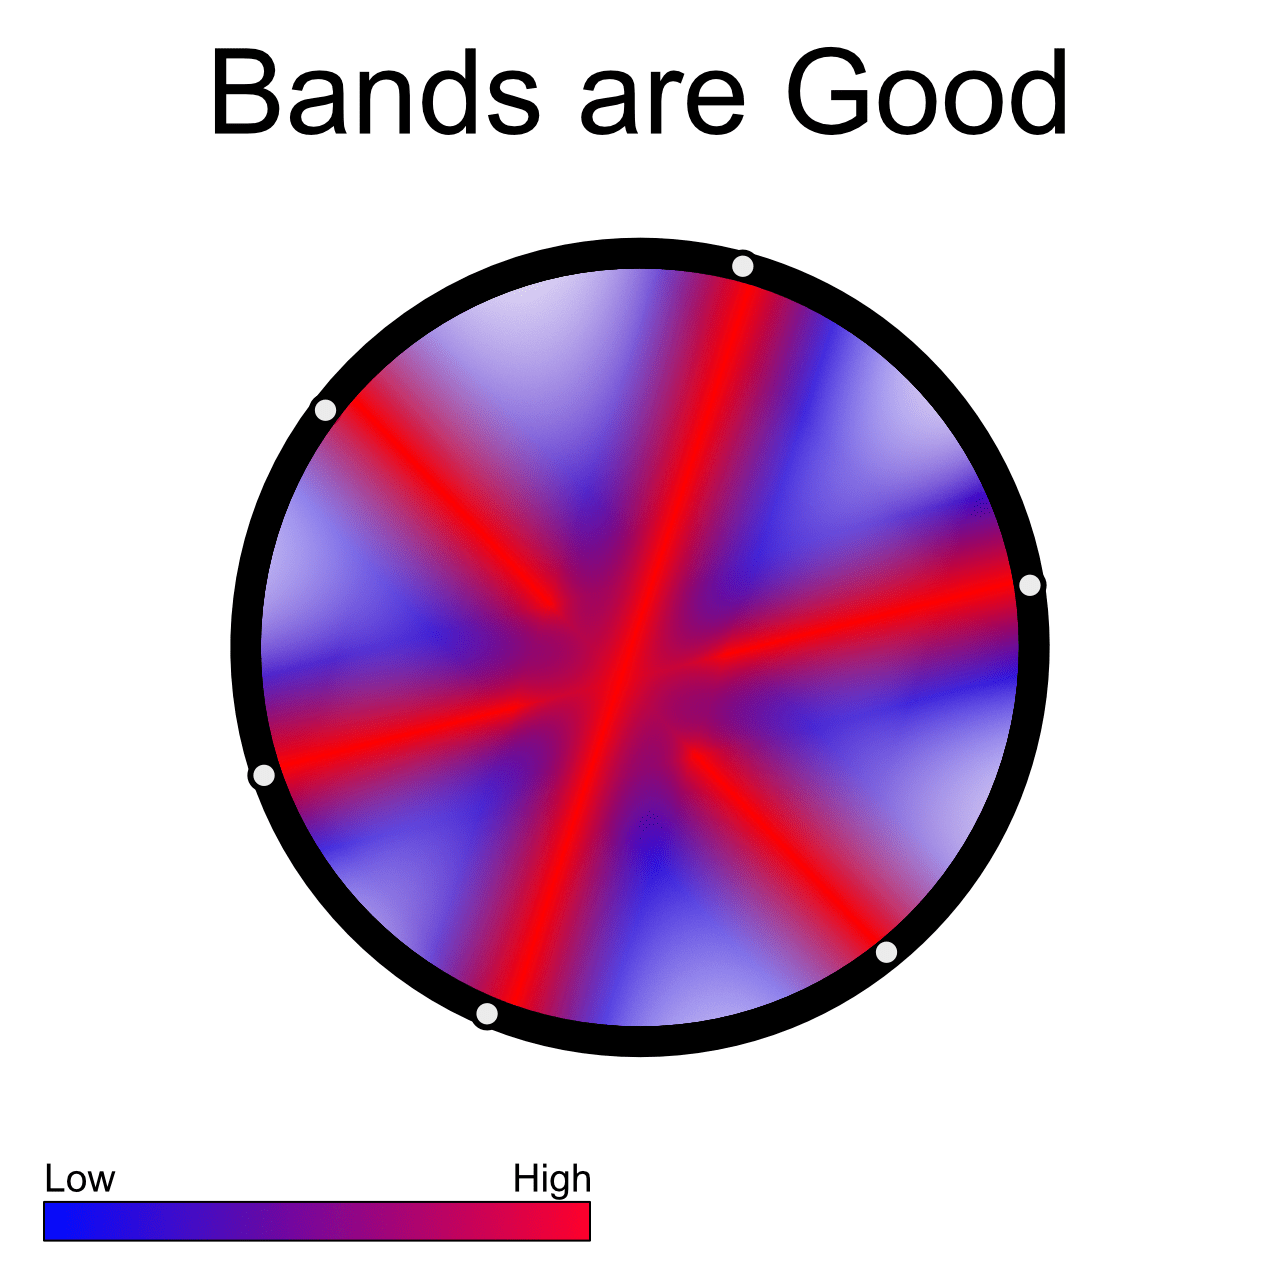 Bands are Good